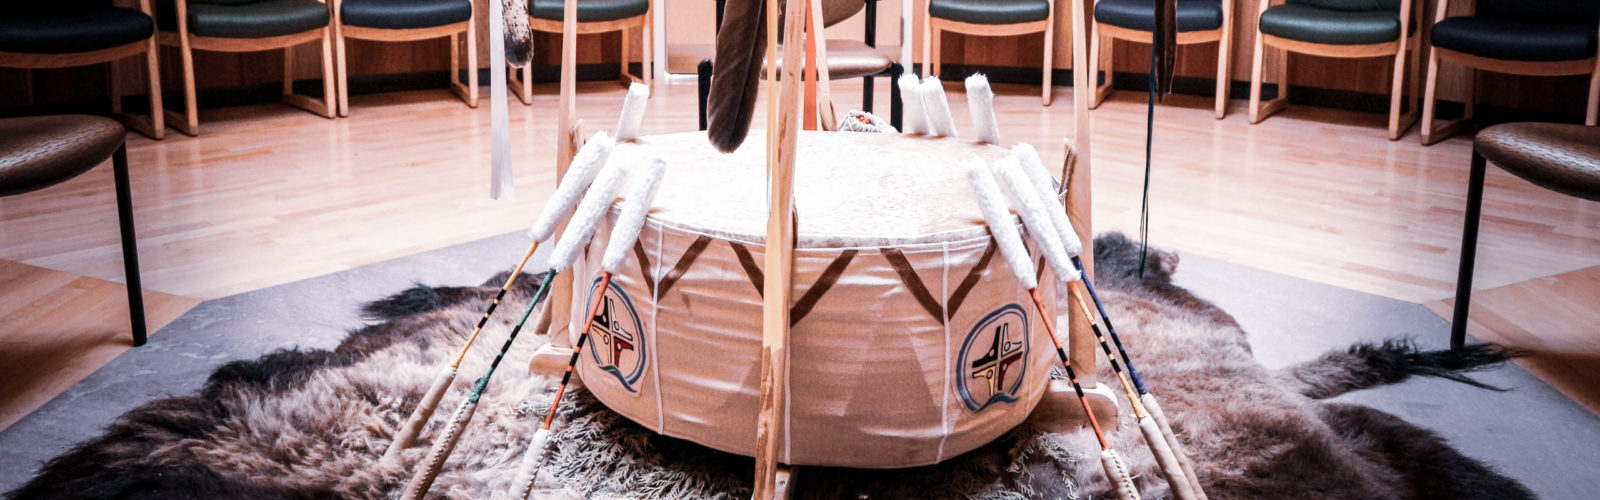 Image of healing room at SLMHC. Drum at centre of room.